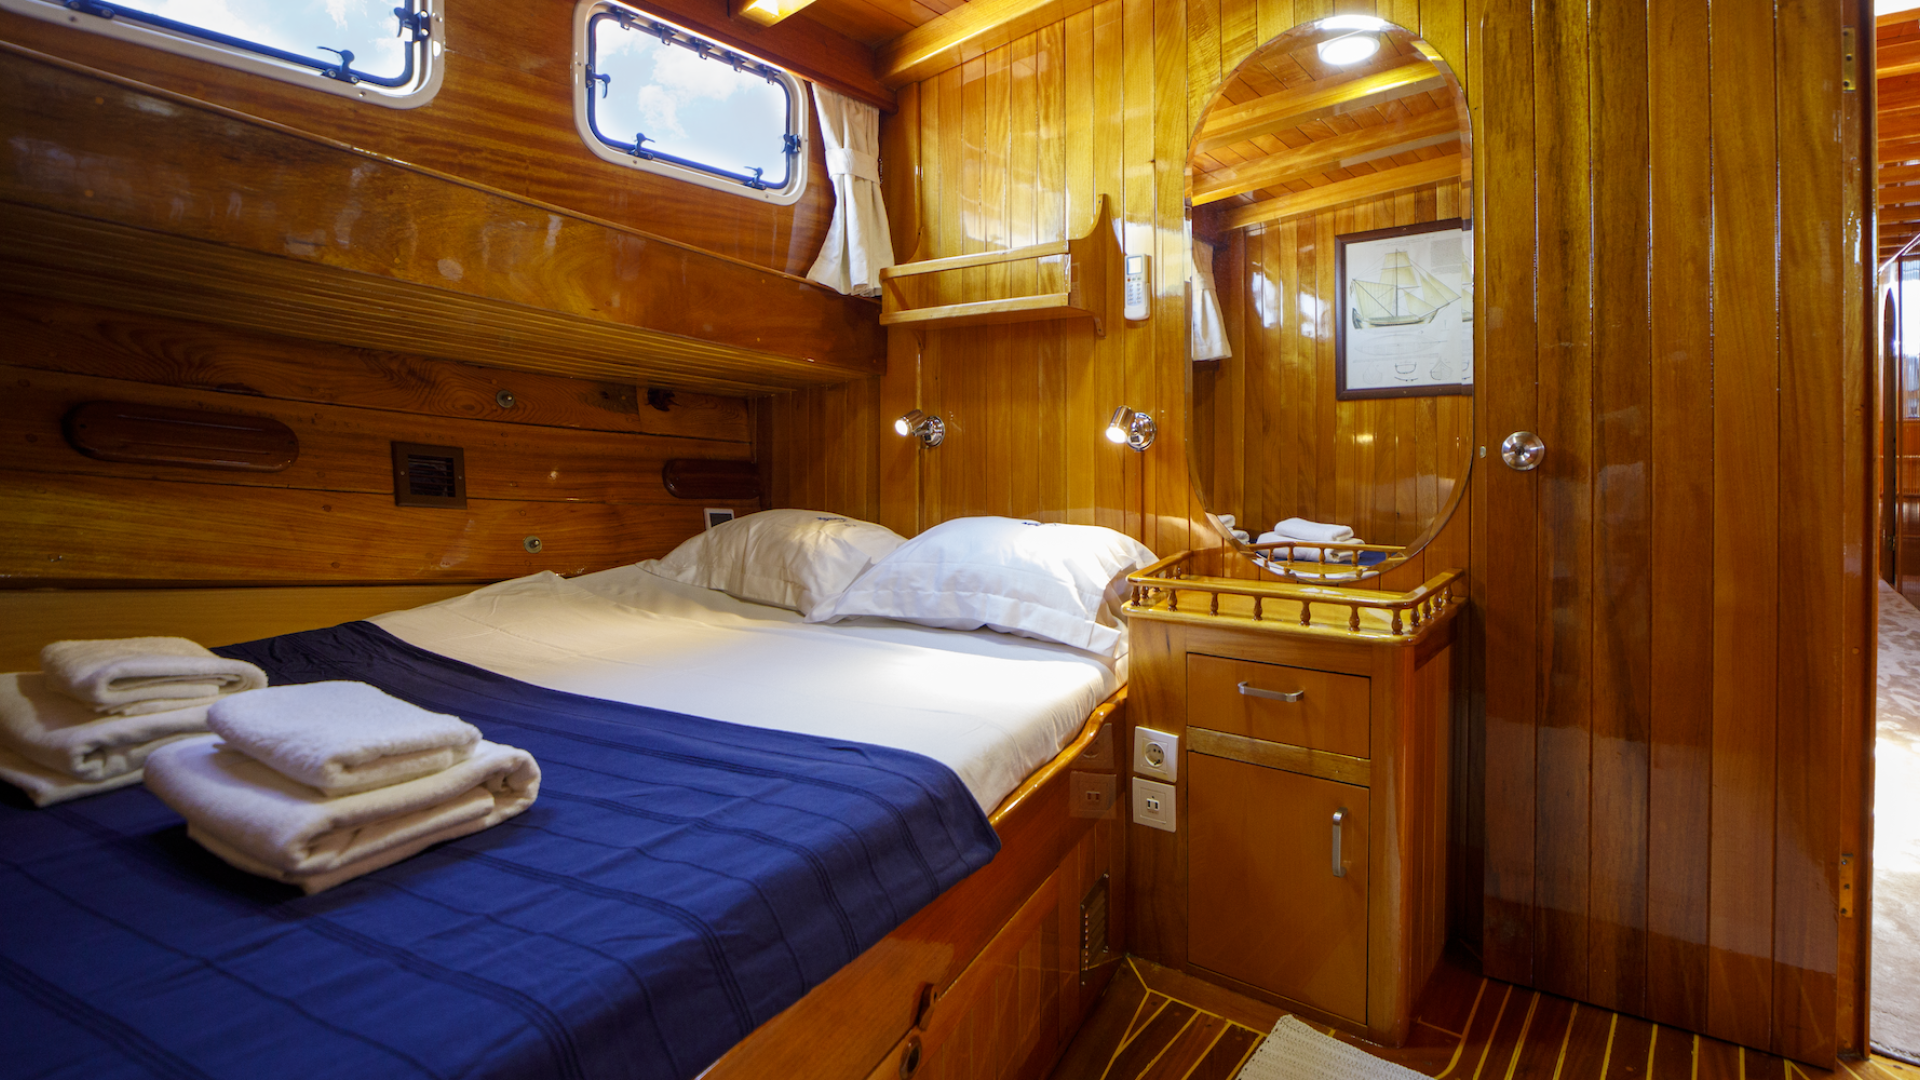 Double bed with white folded towels at the foot, next to a small vanity with a mirror aboard a small yacht in Turkey